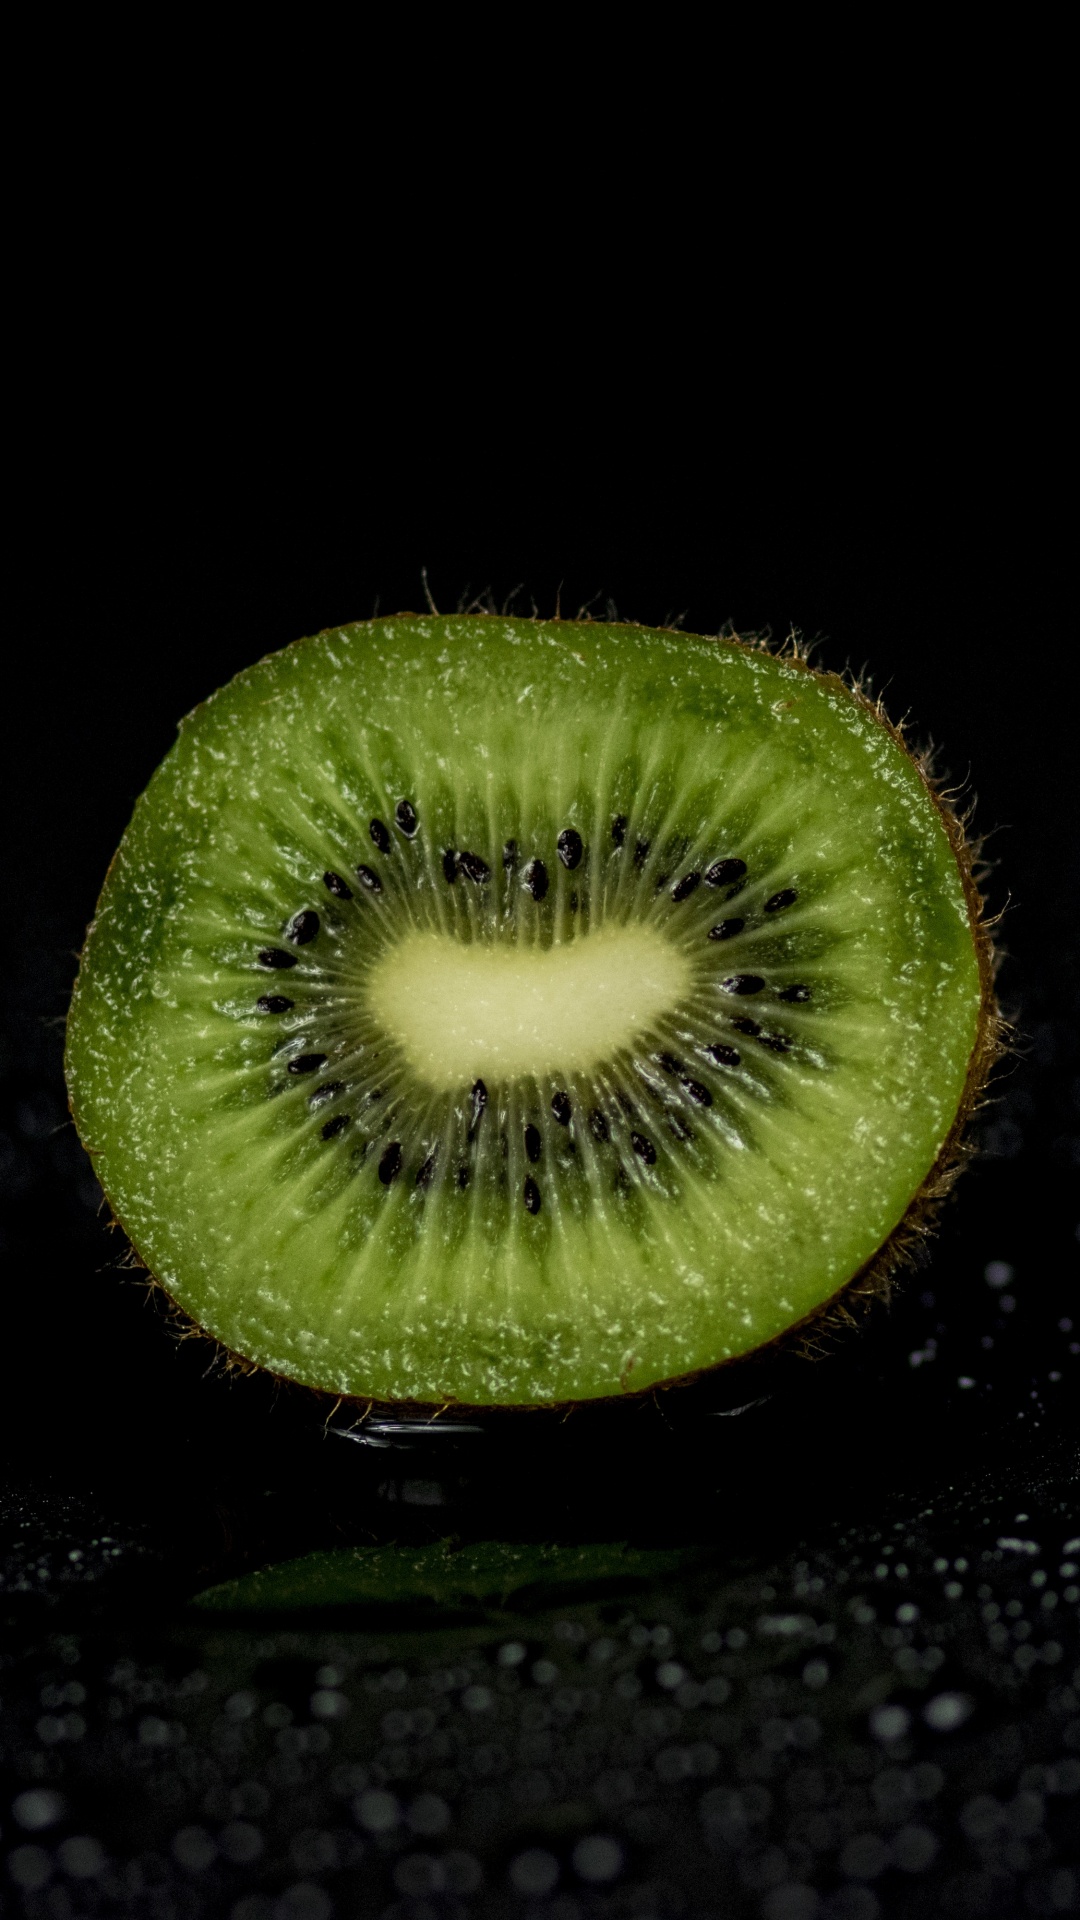 Green Round Fruit on Black Surface. Wallpaper in 1080x1920 Resolution